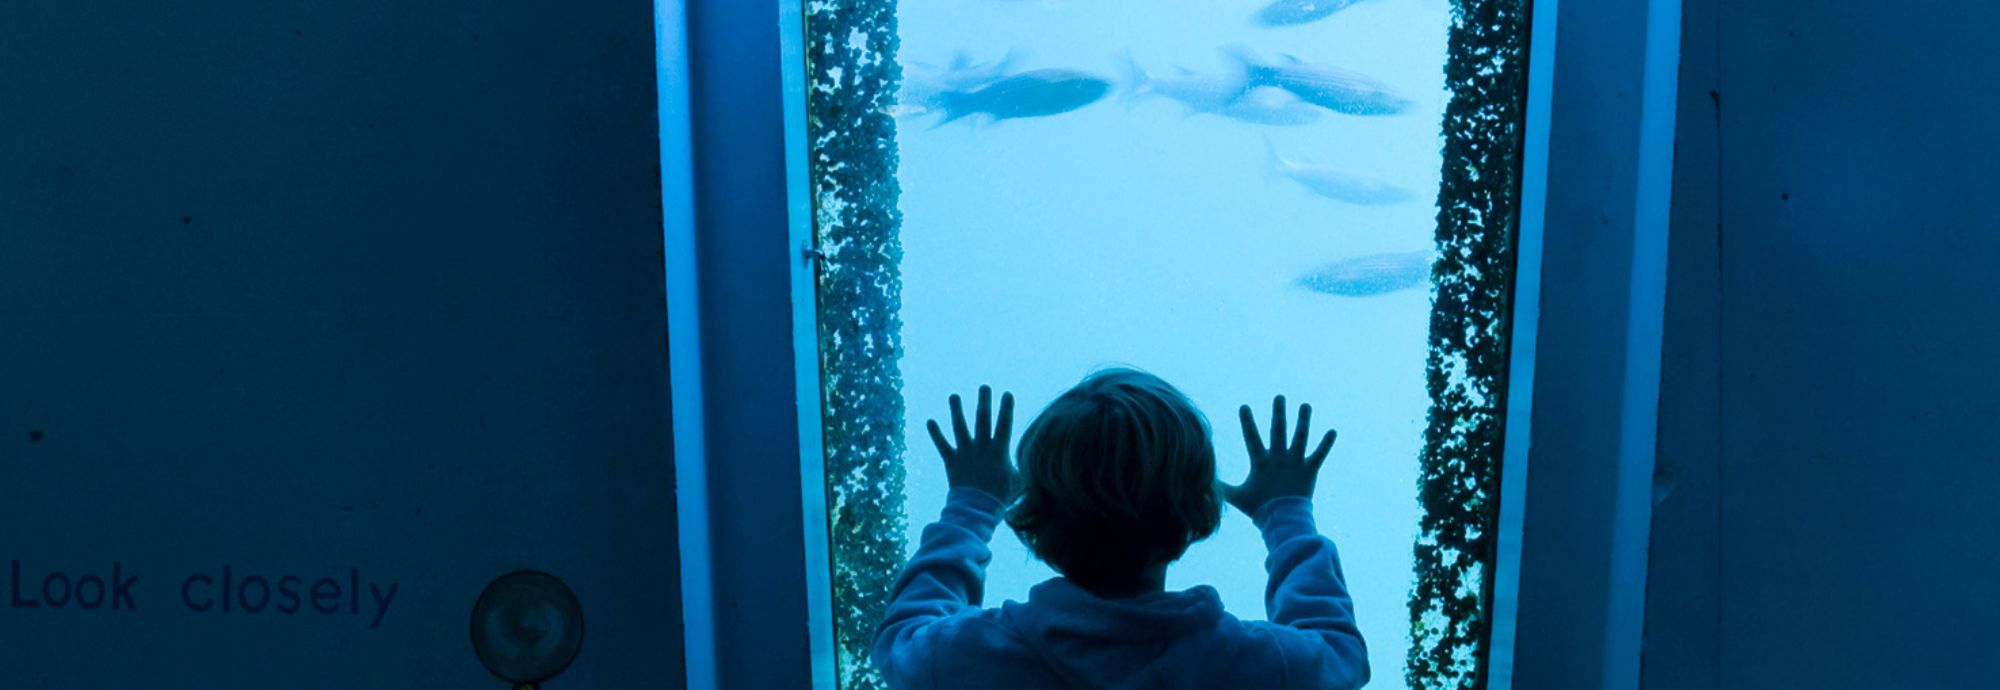 A child looking at fish through the underwater windows at National Maritime Museum Cornwall.